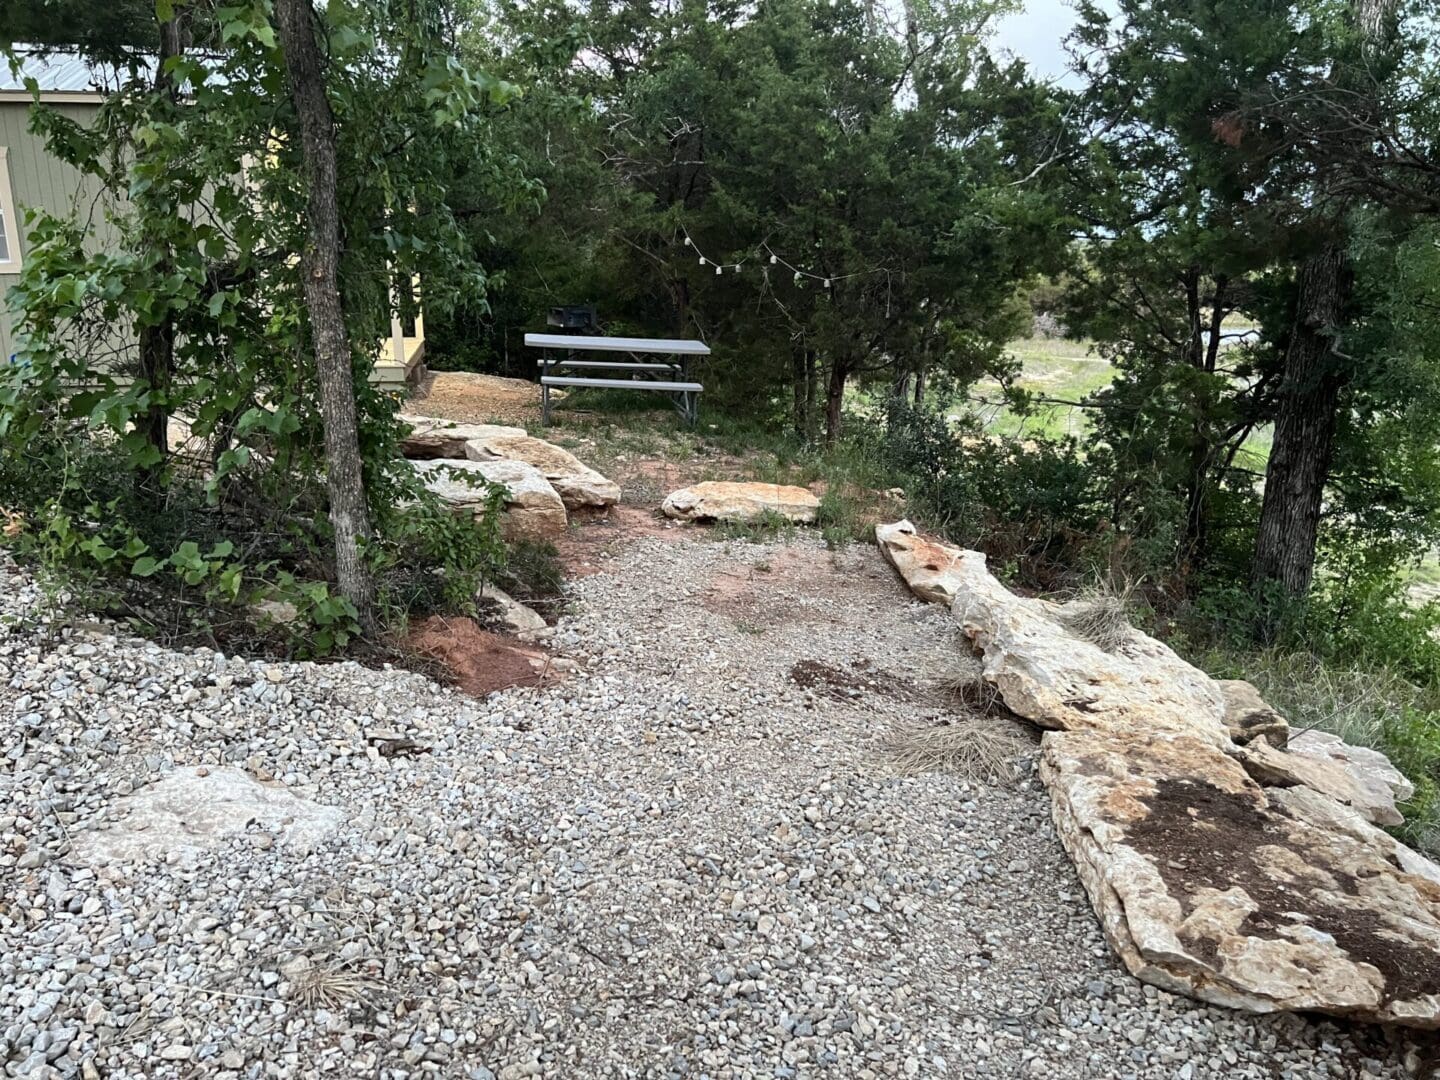 A bench sitting on top of a gravel path.